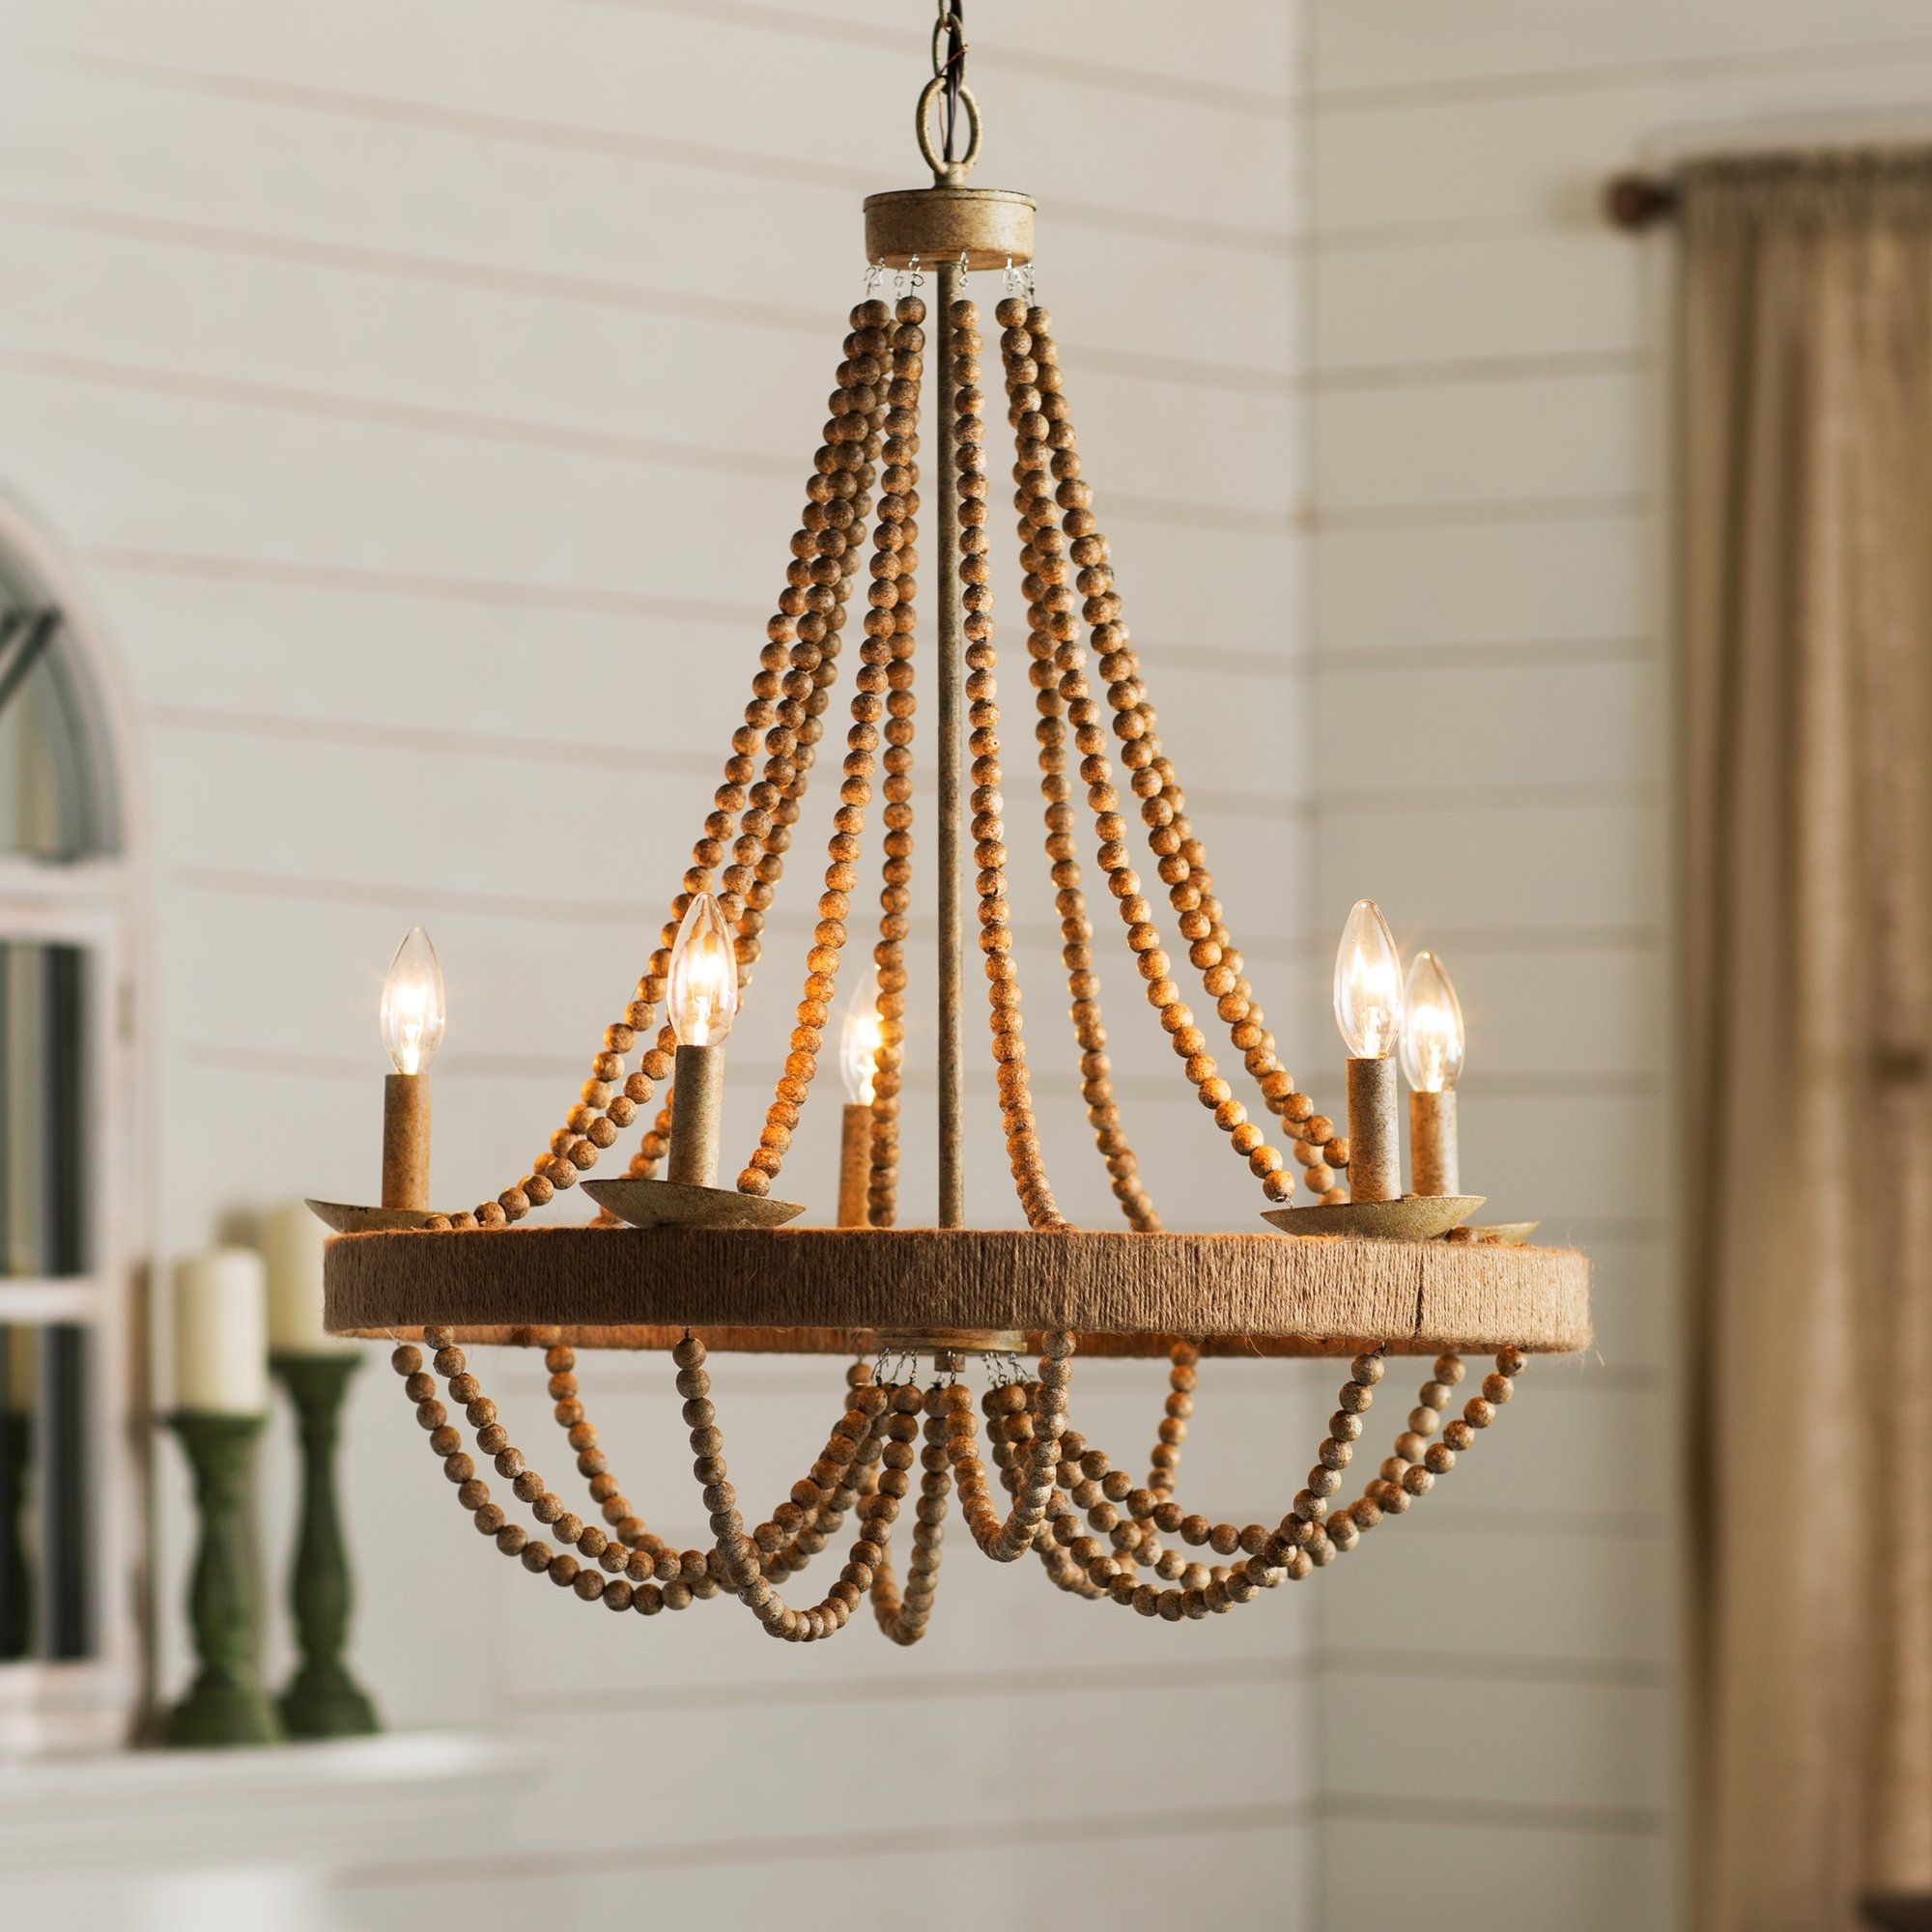 Lantieri 5 Light Candle Chandelier Reviews Joss Main In Candle Chandelier (View 5 of 15)